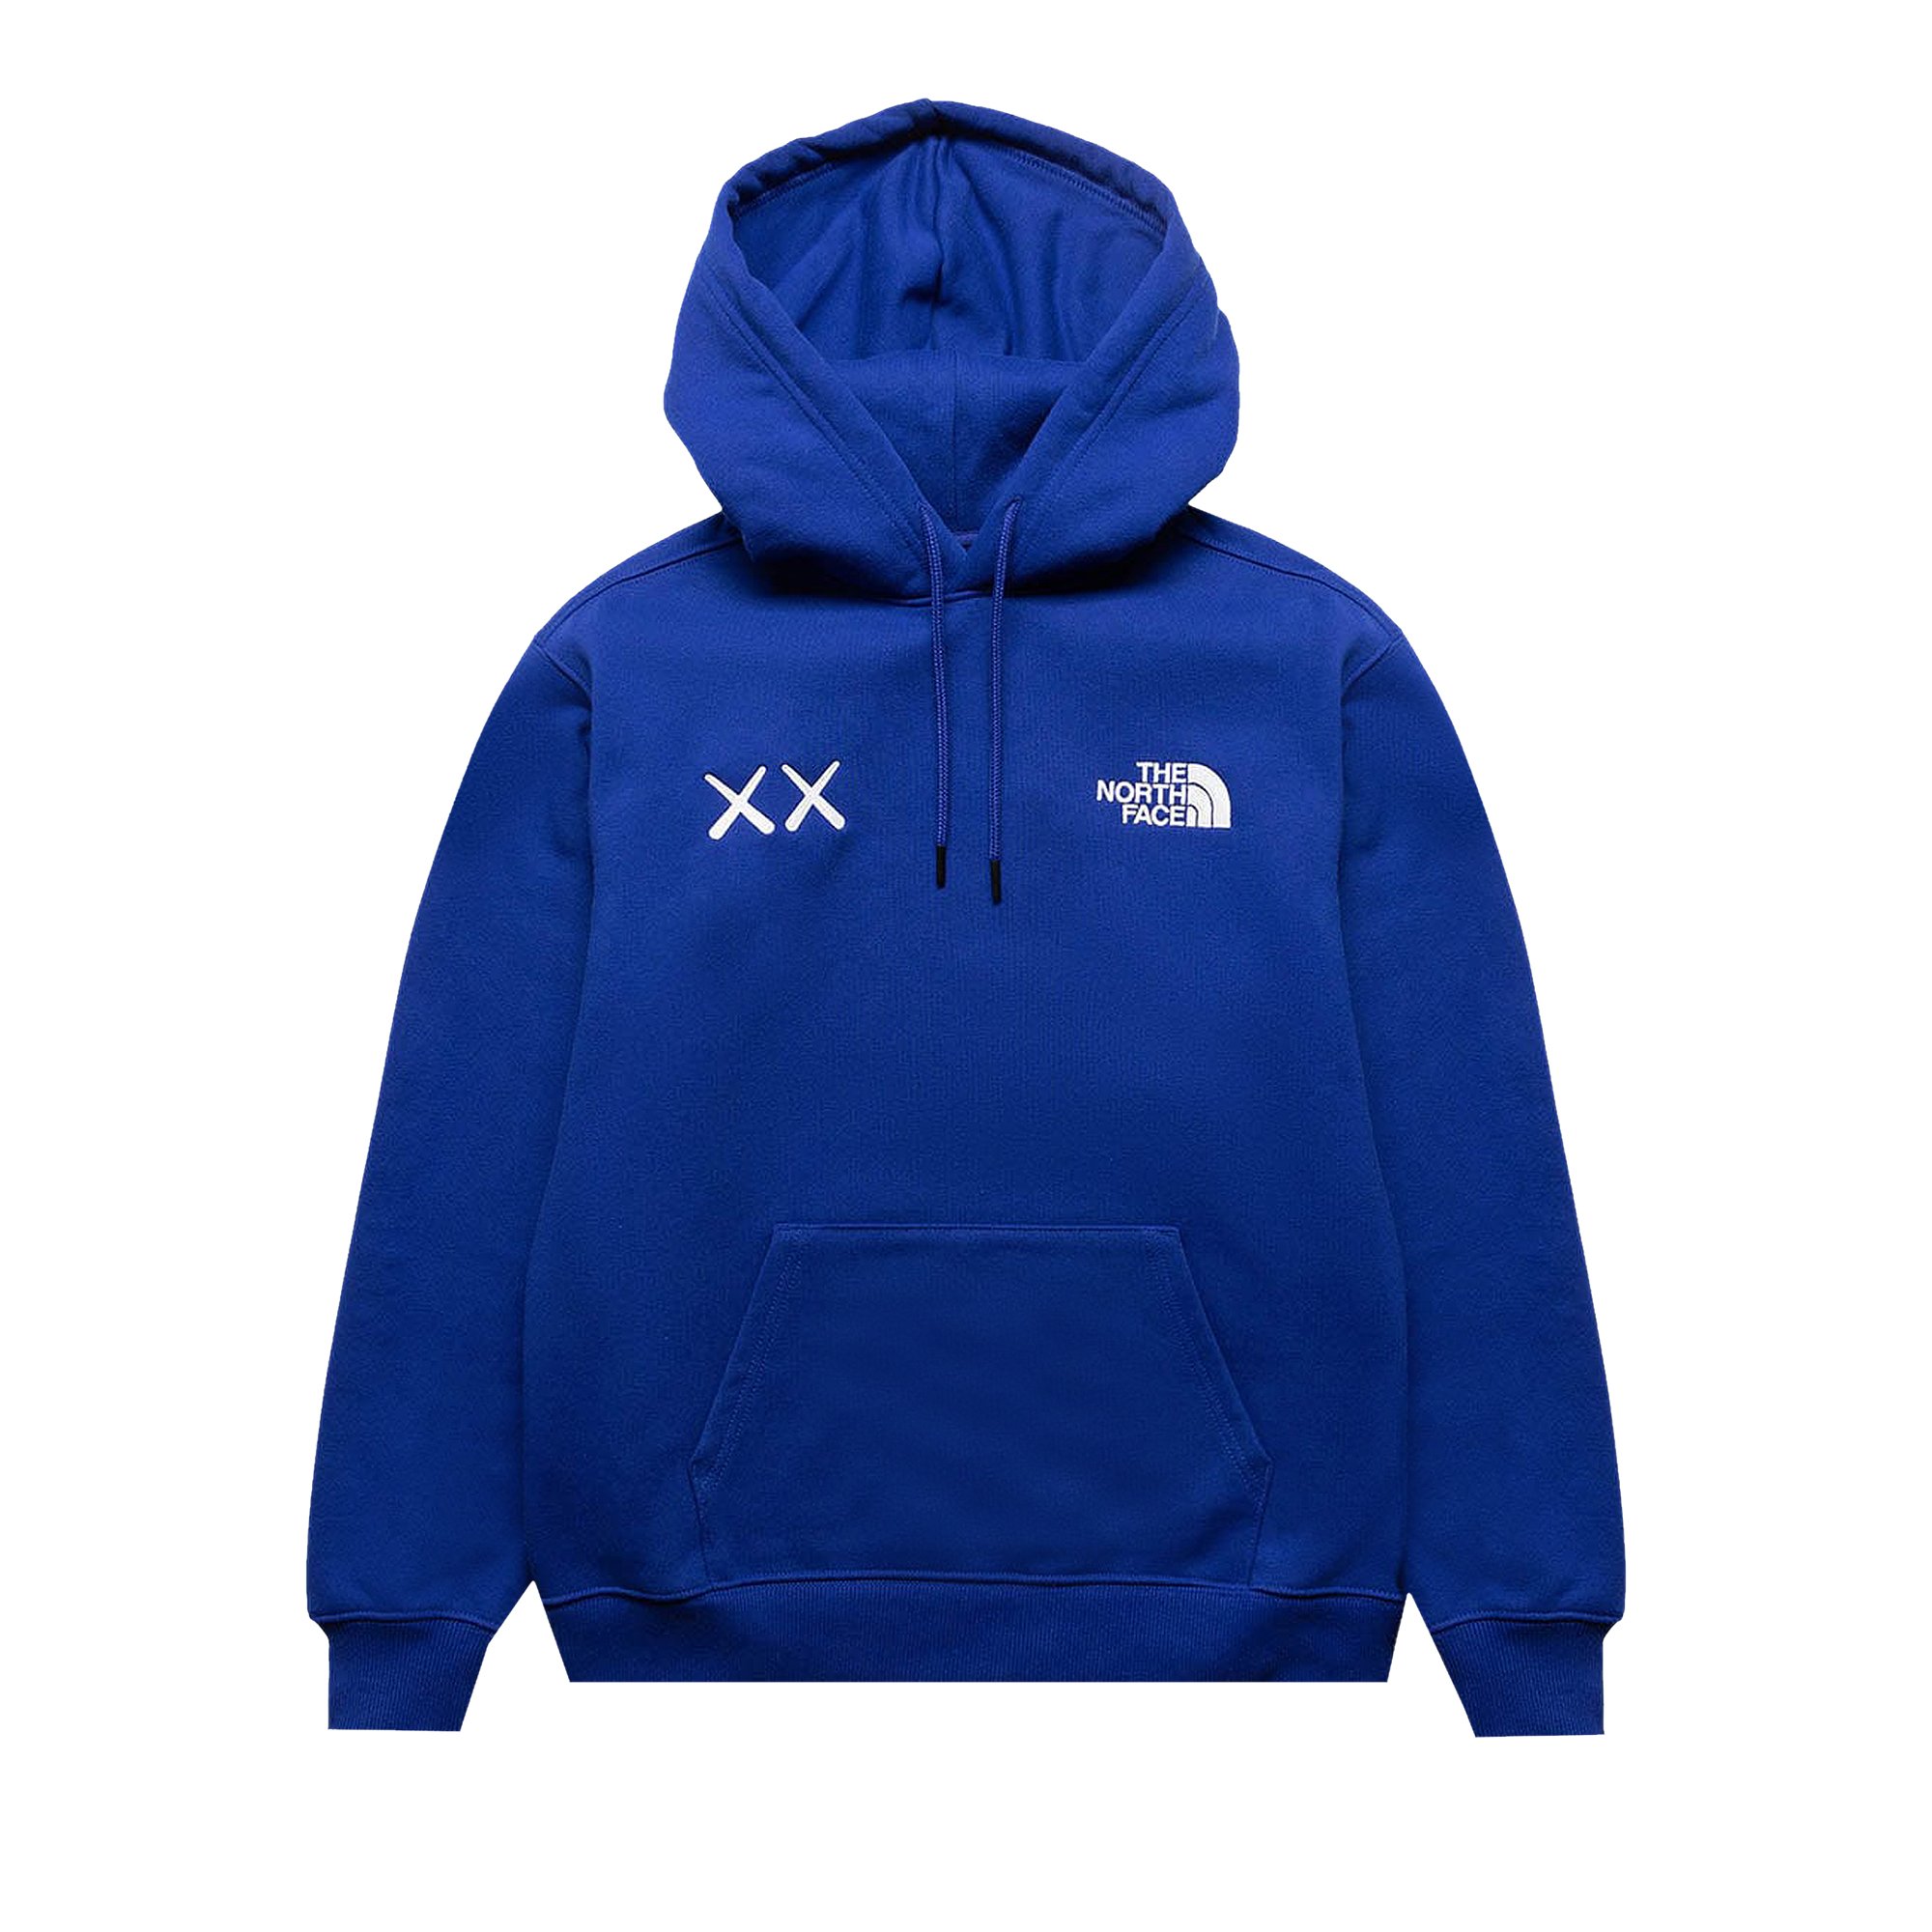 The North Face x KAWS Pullover Hoodie 'Bolt Blue'